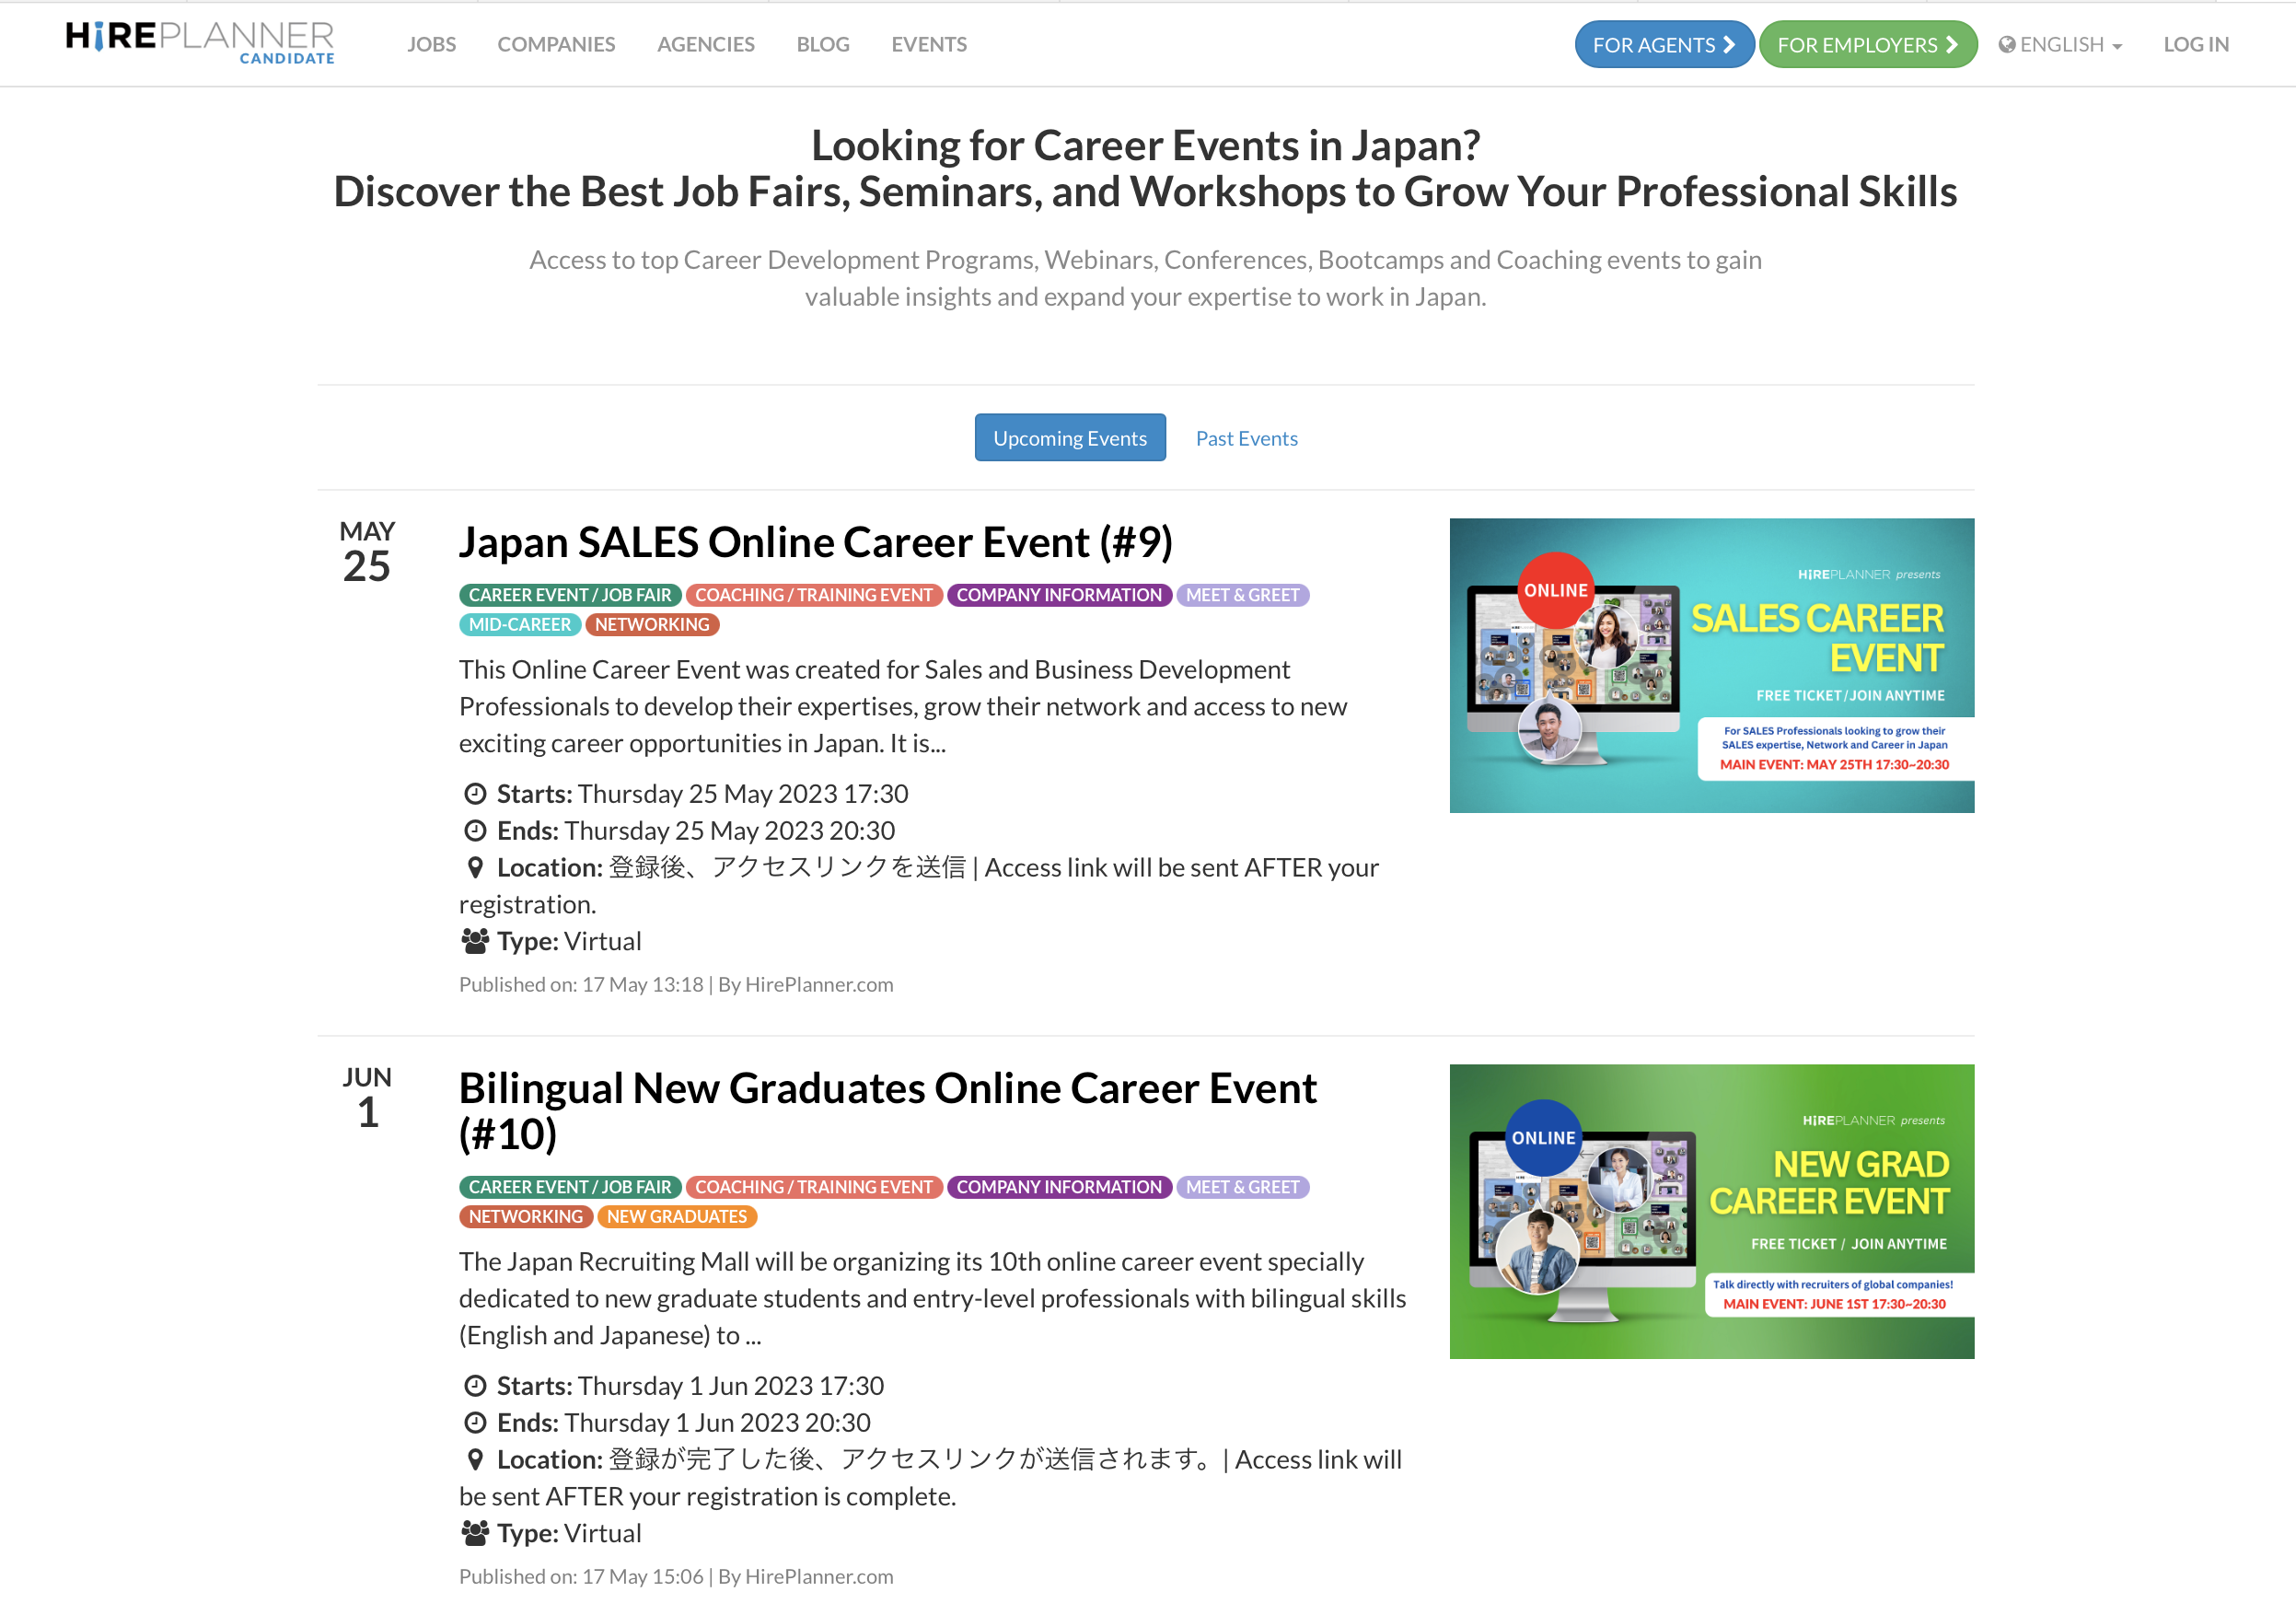 HirePlanner.com Launches Employer Branding “Event Promotion” Platform For Companies Hiring in Japan